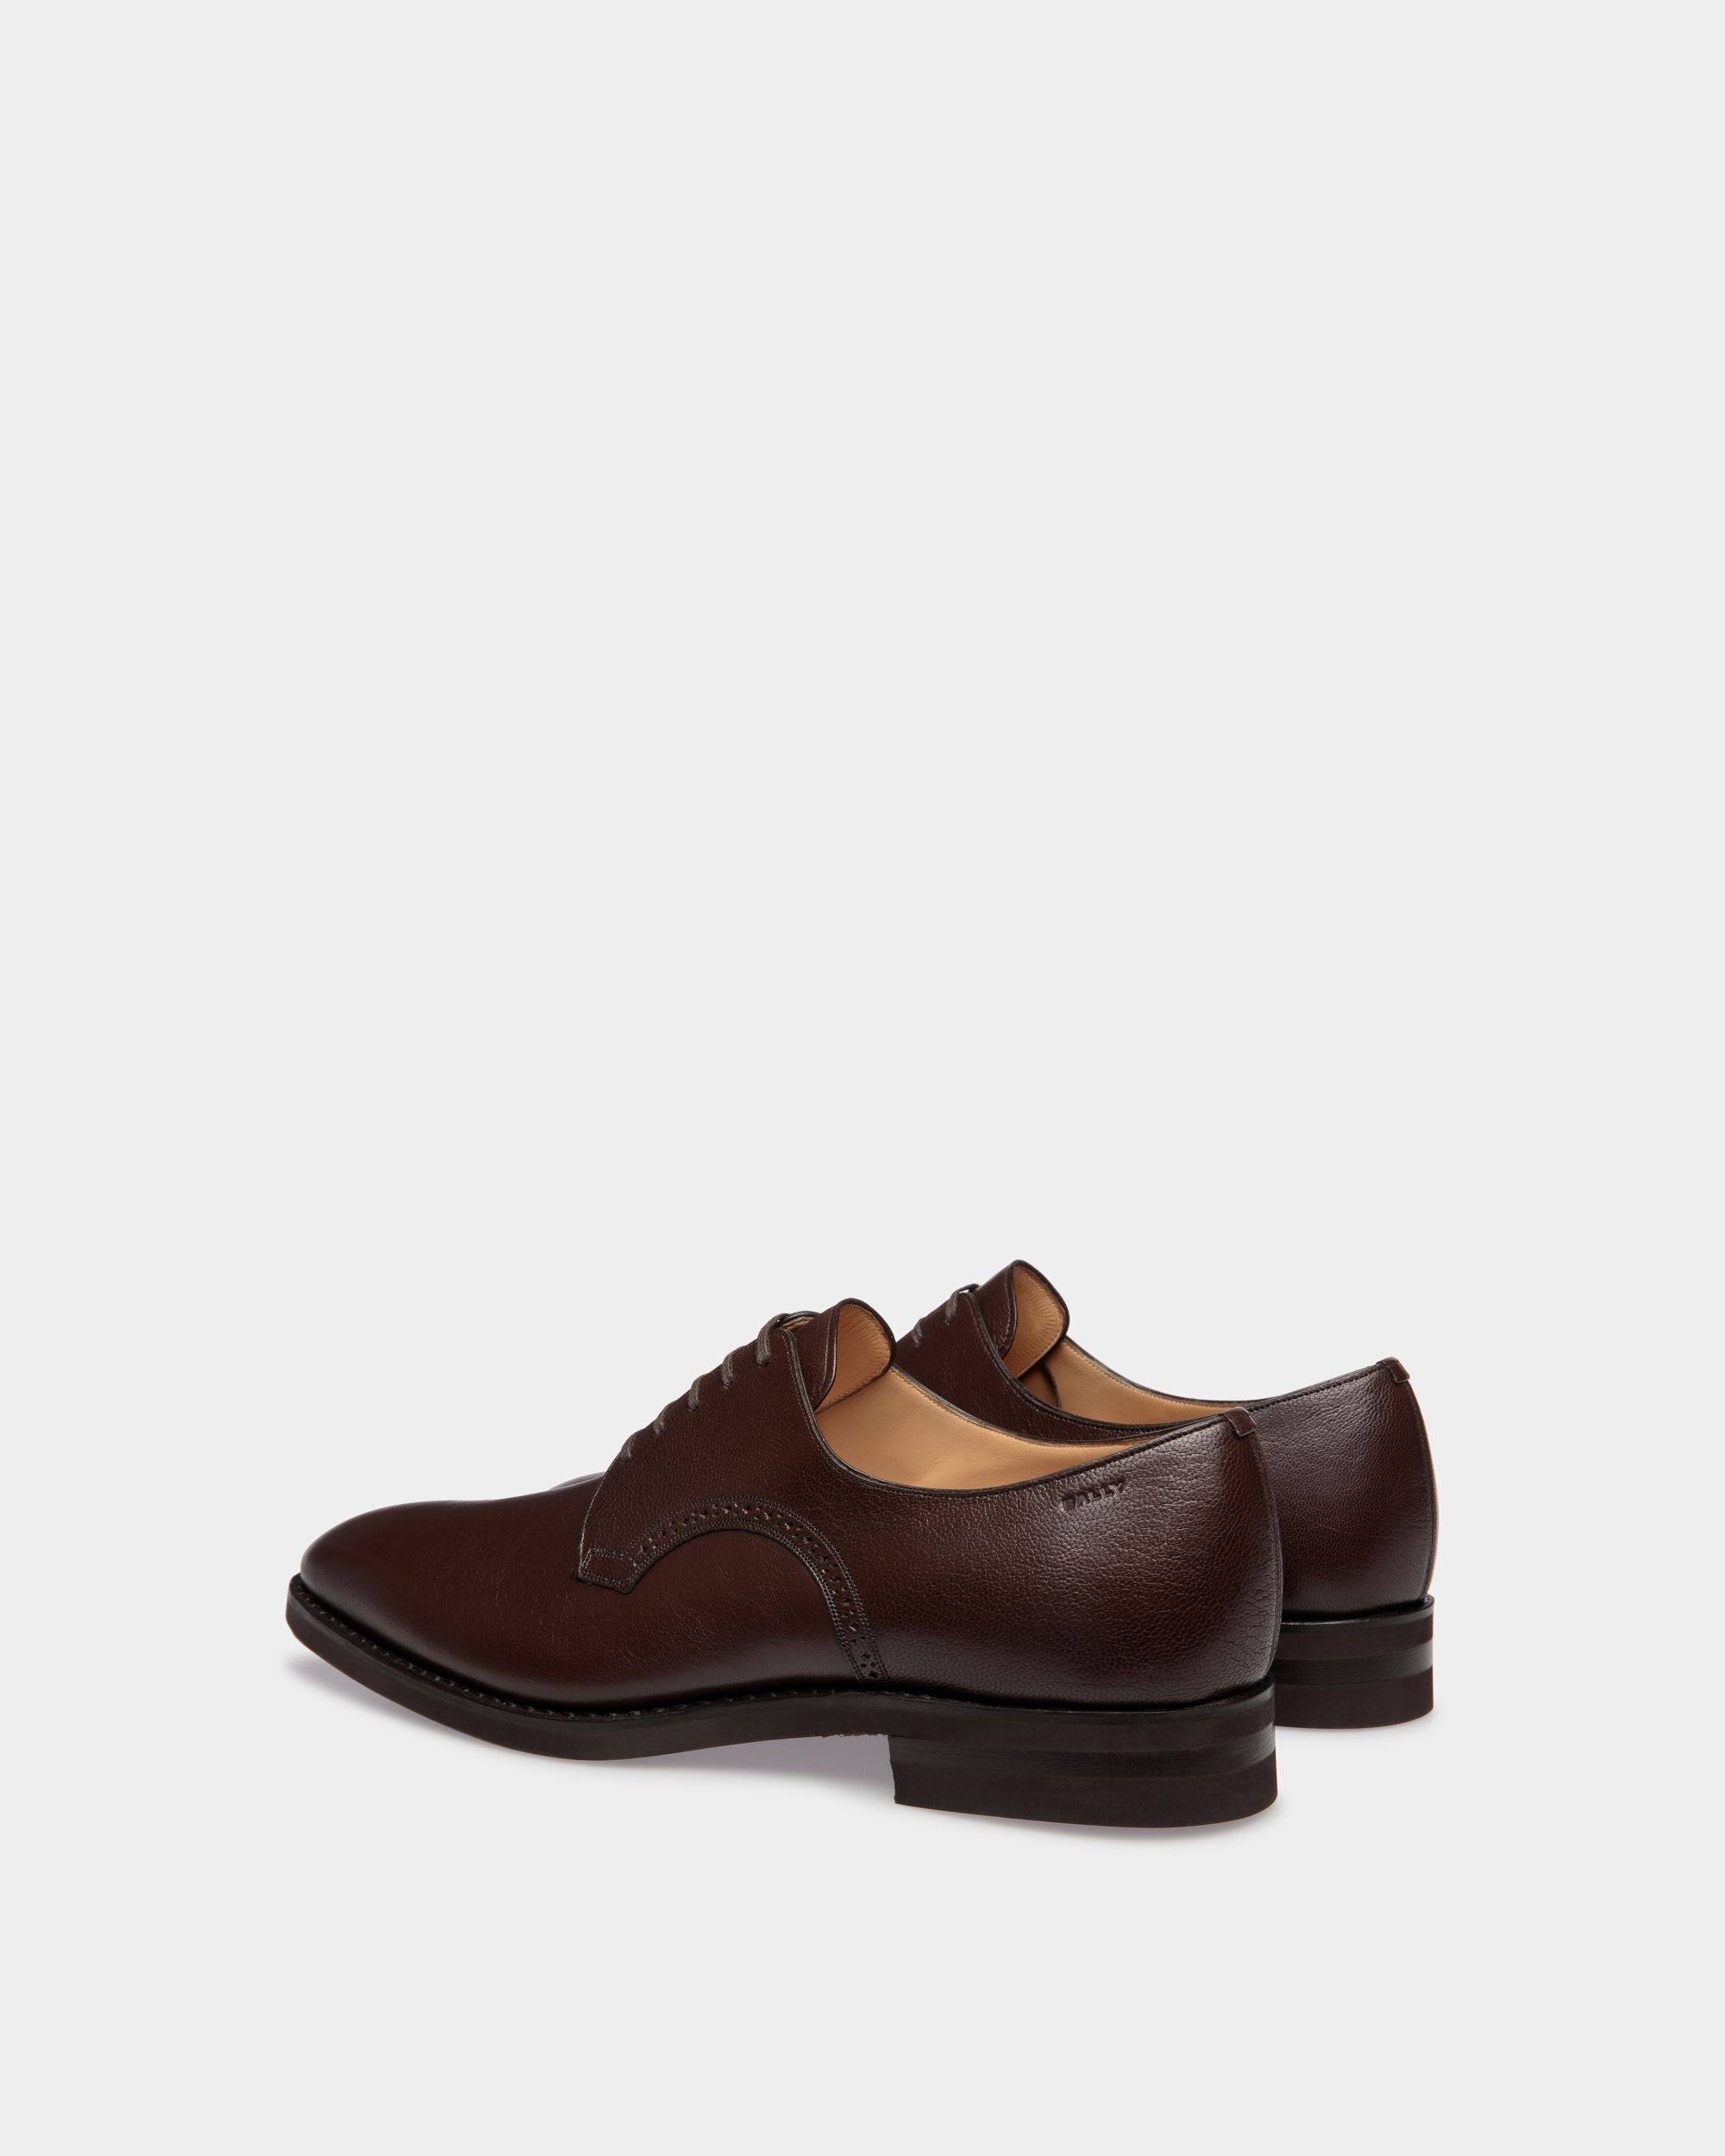 Scribe | Men's Derby in Brown Grained Leather | Bally | Still Life 3/4 Front